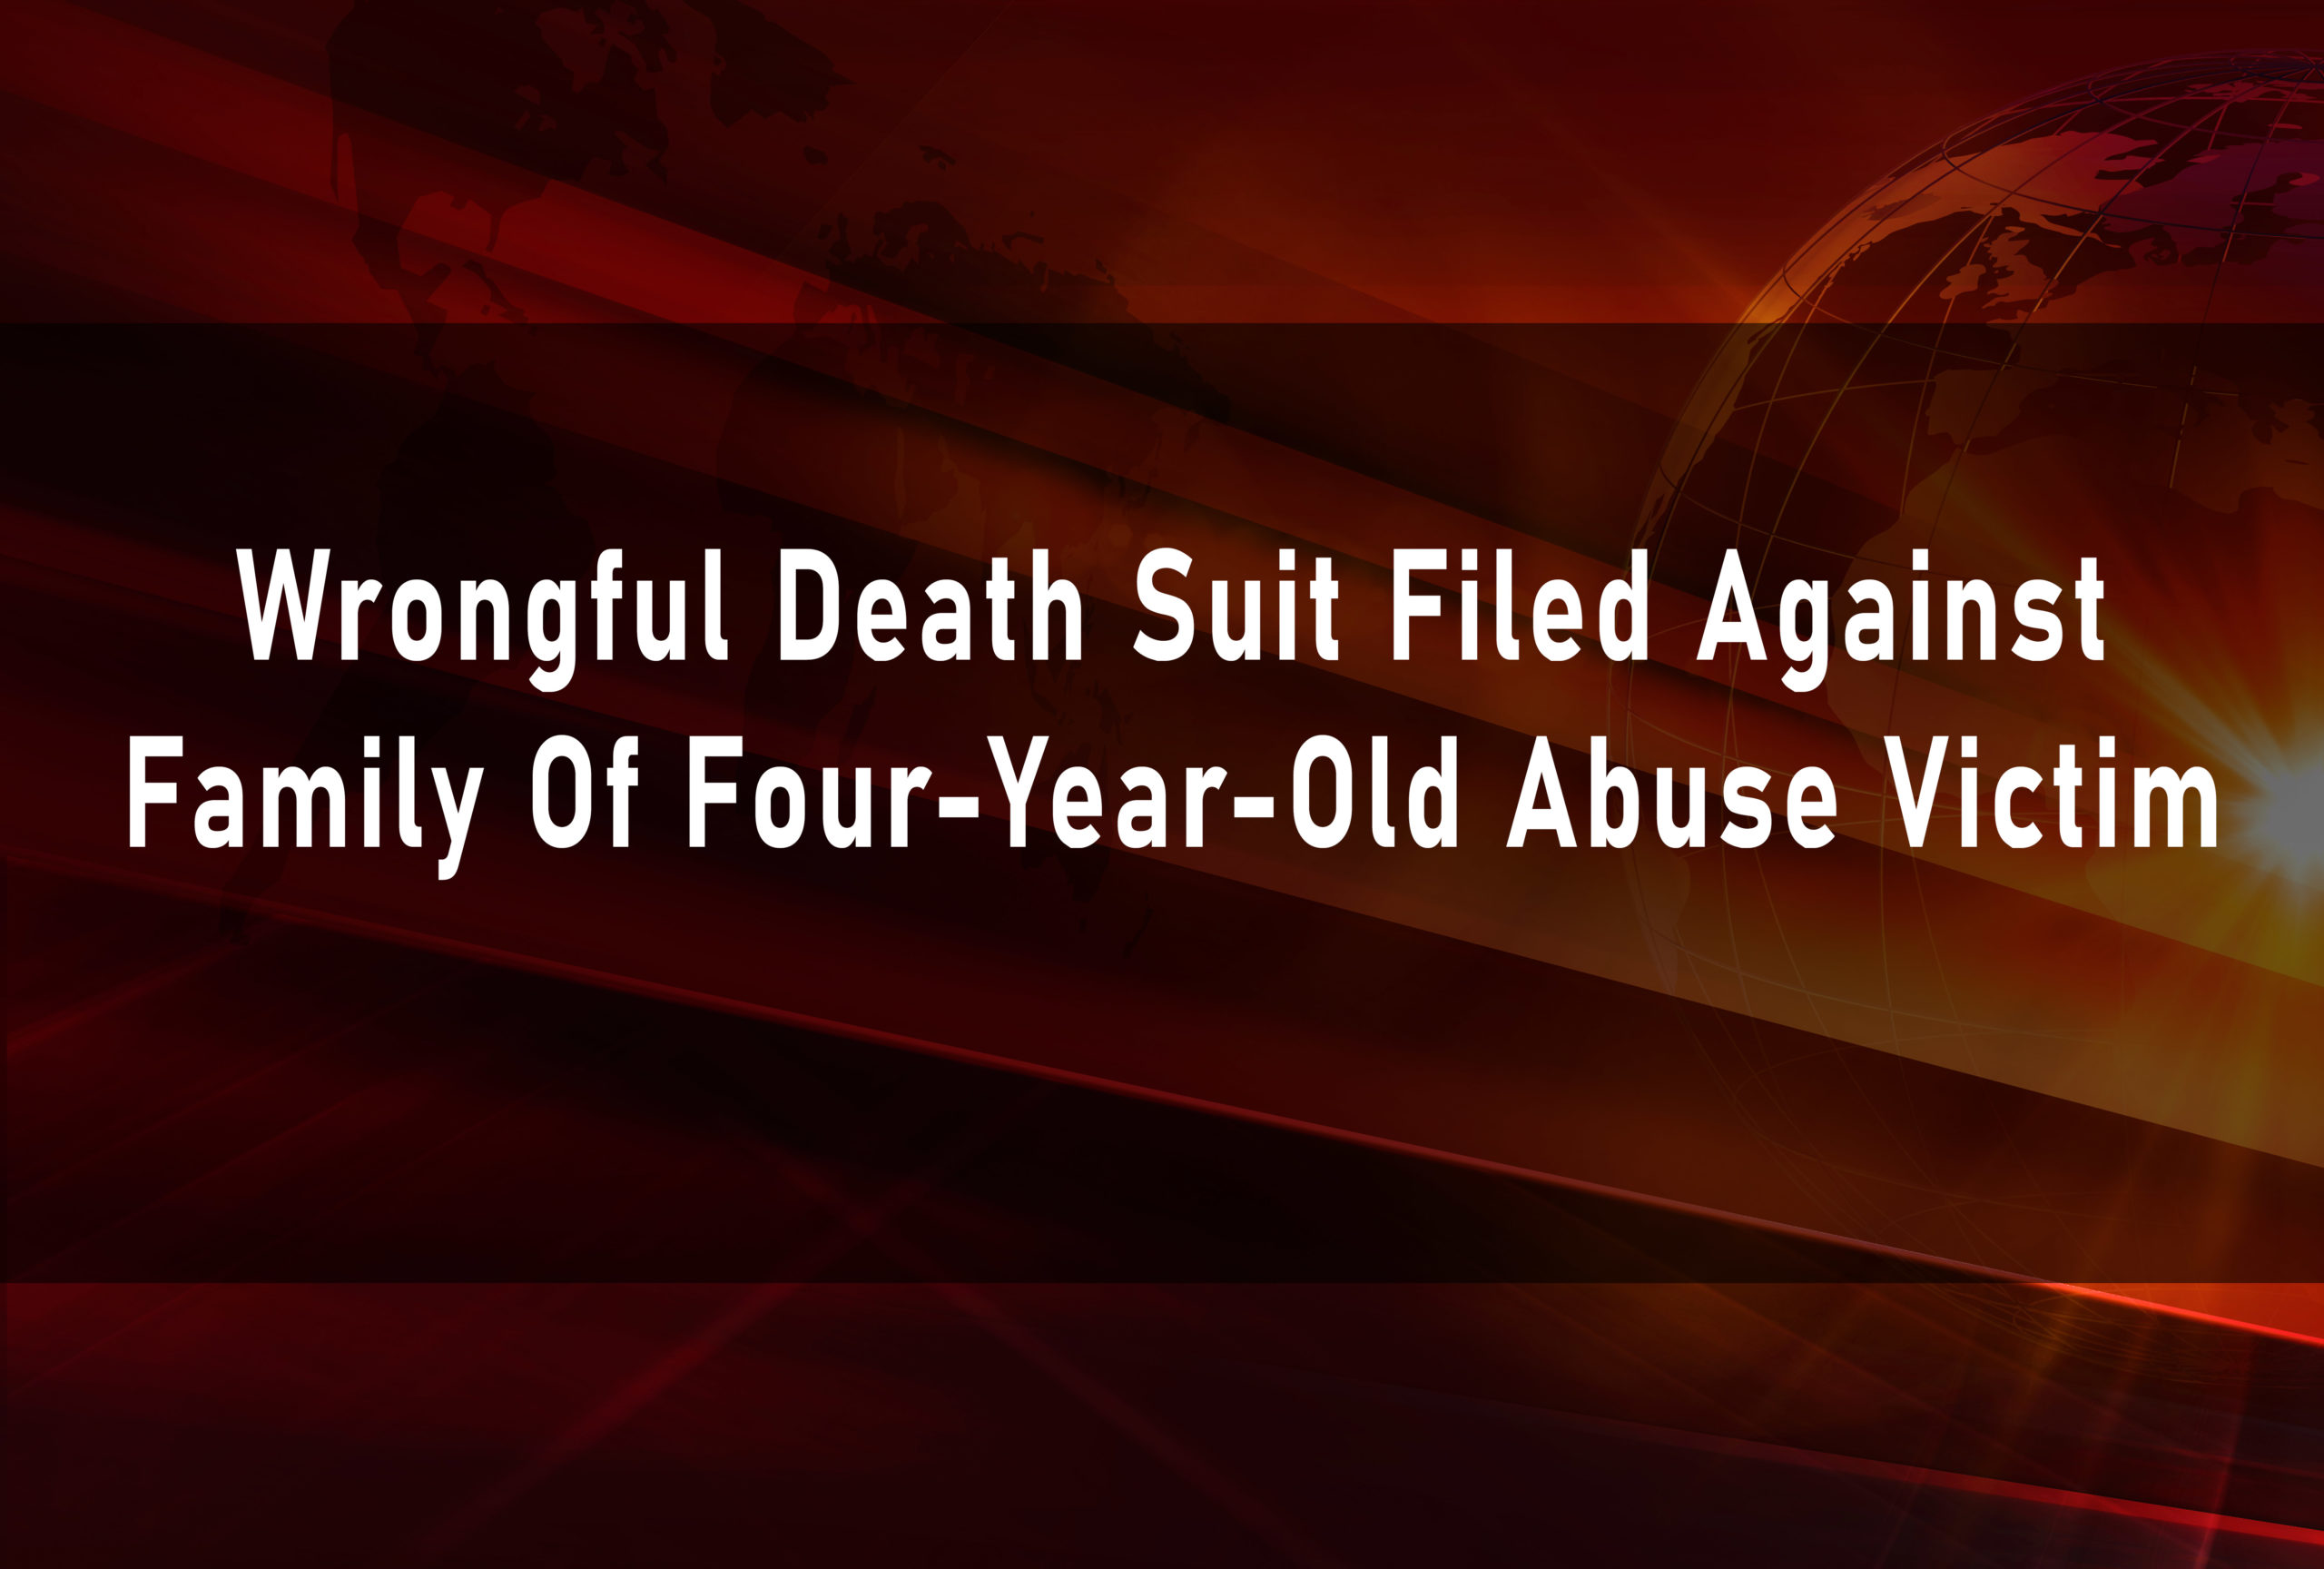 Wrongful Death Suit Filed Against Family Of Four-Year-Old Abuse Victim